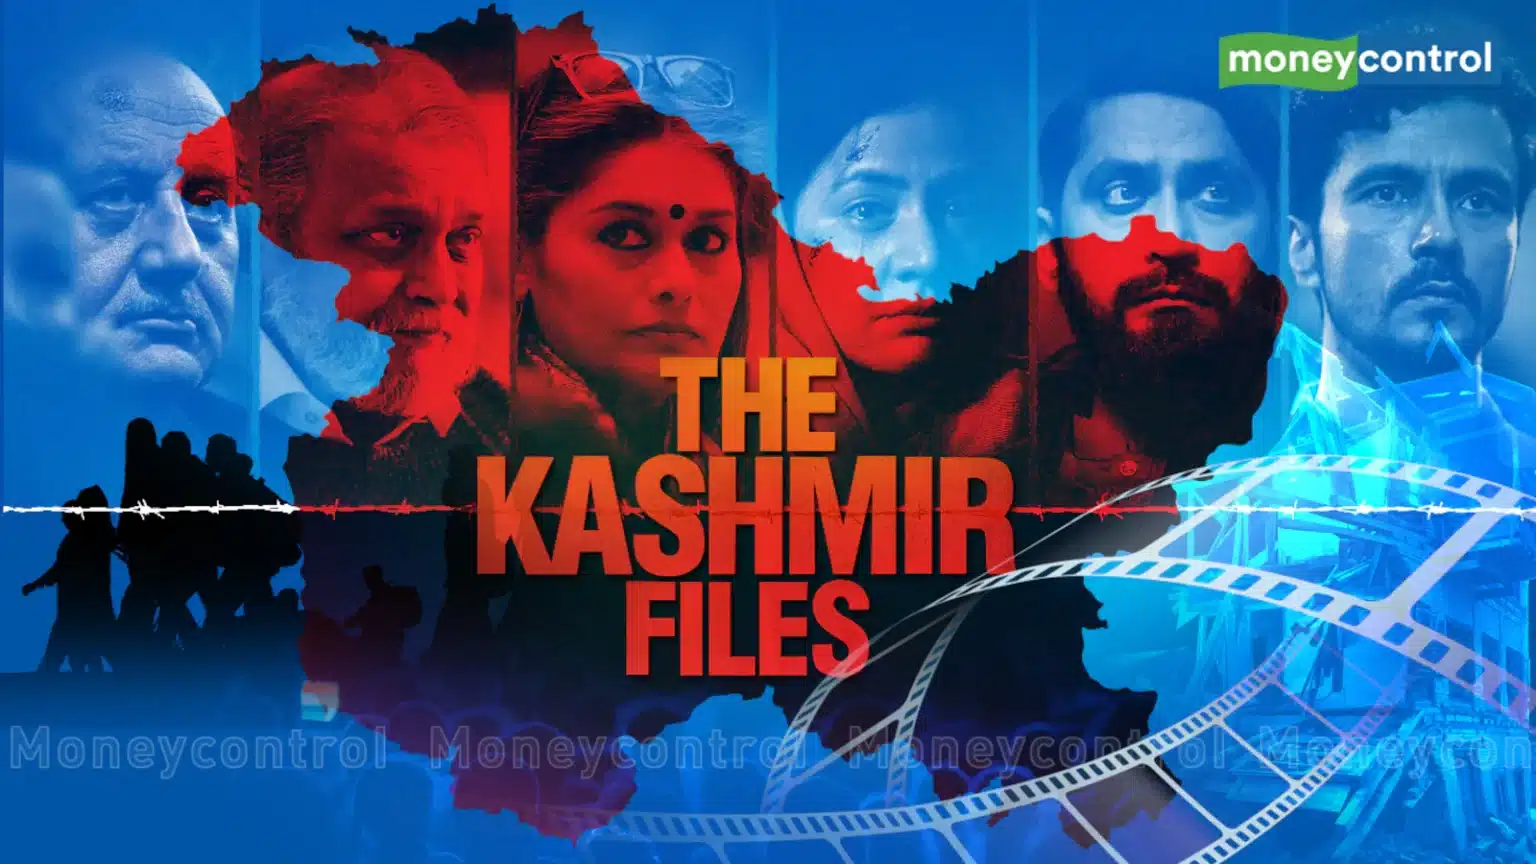 Anupam Kher responds to The Kashmir Files being referred to as a “propaganda, vulgar film” by the IFFI jury head